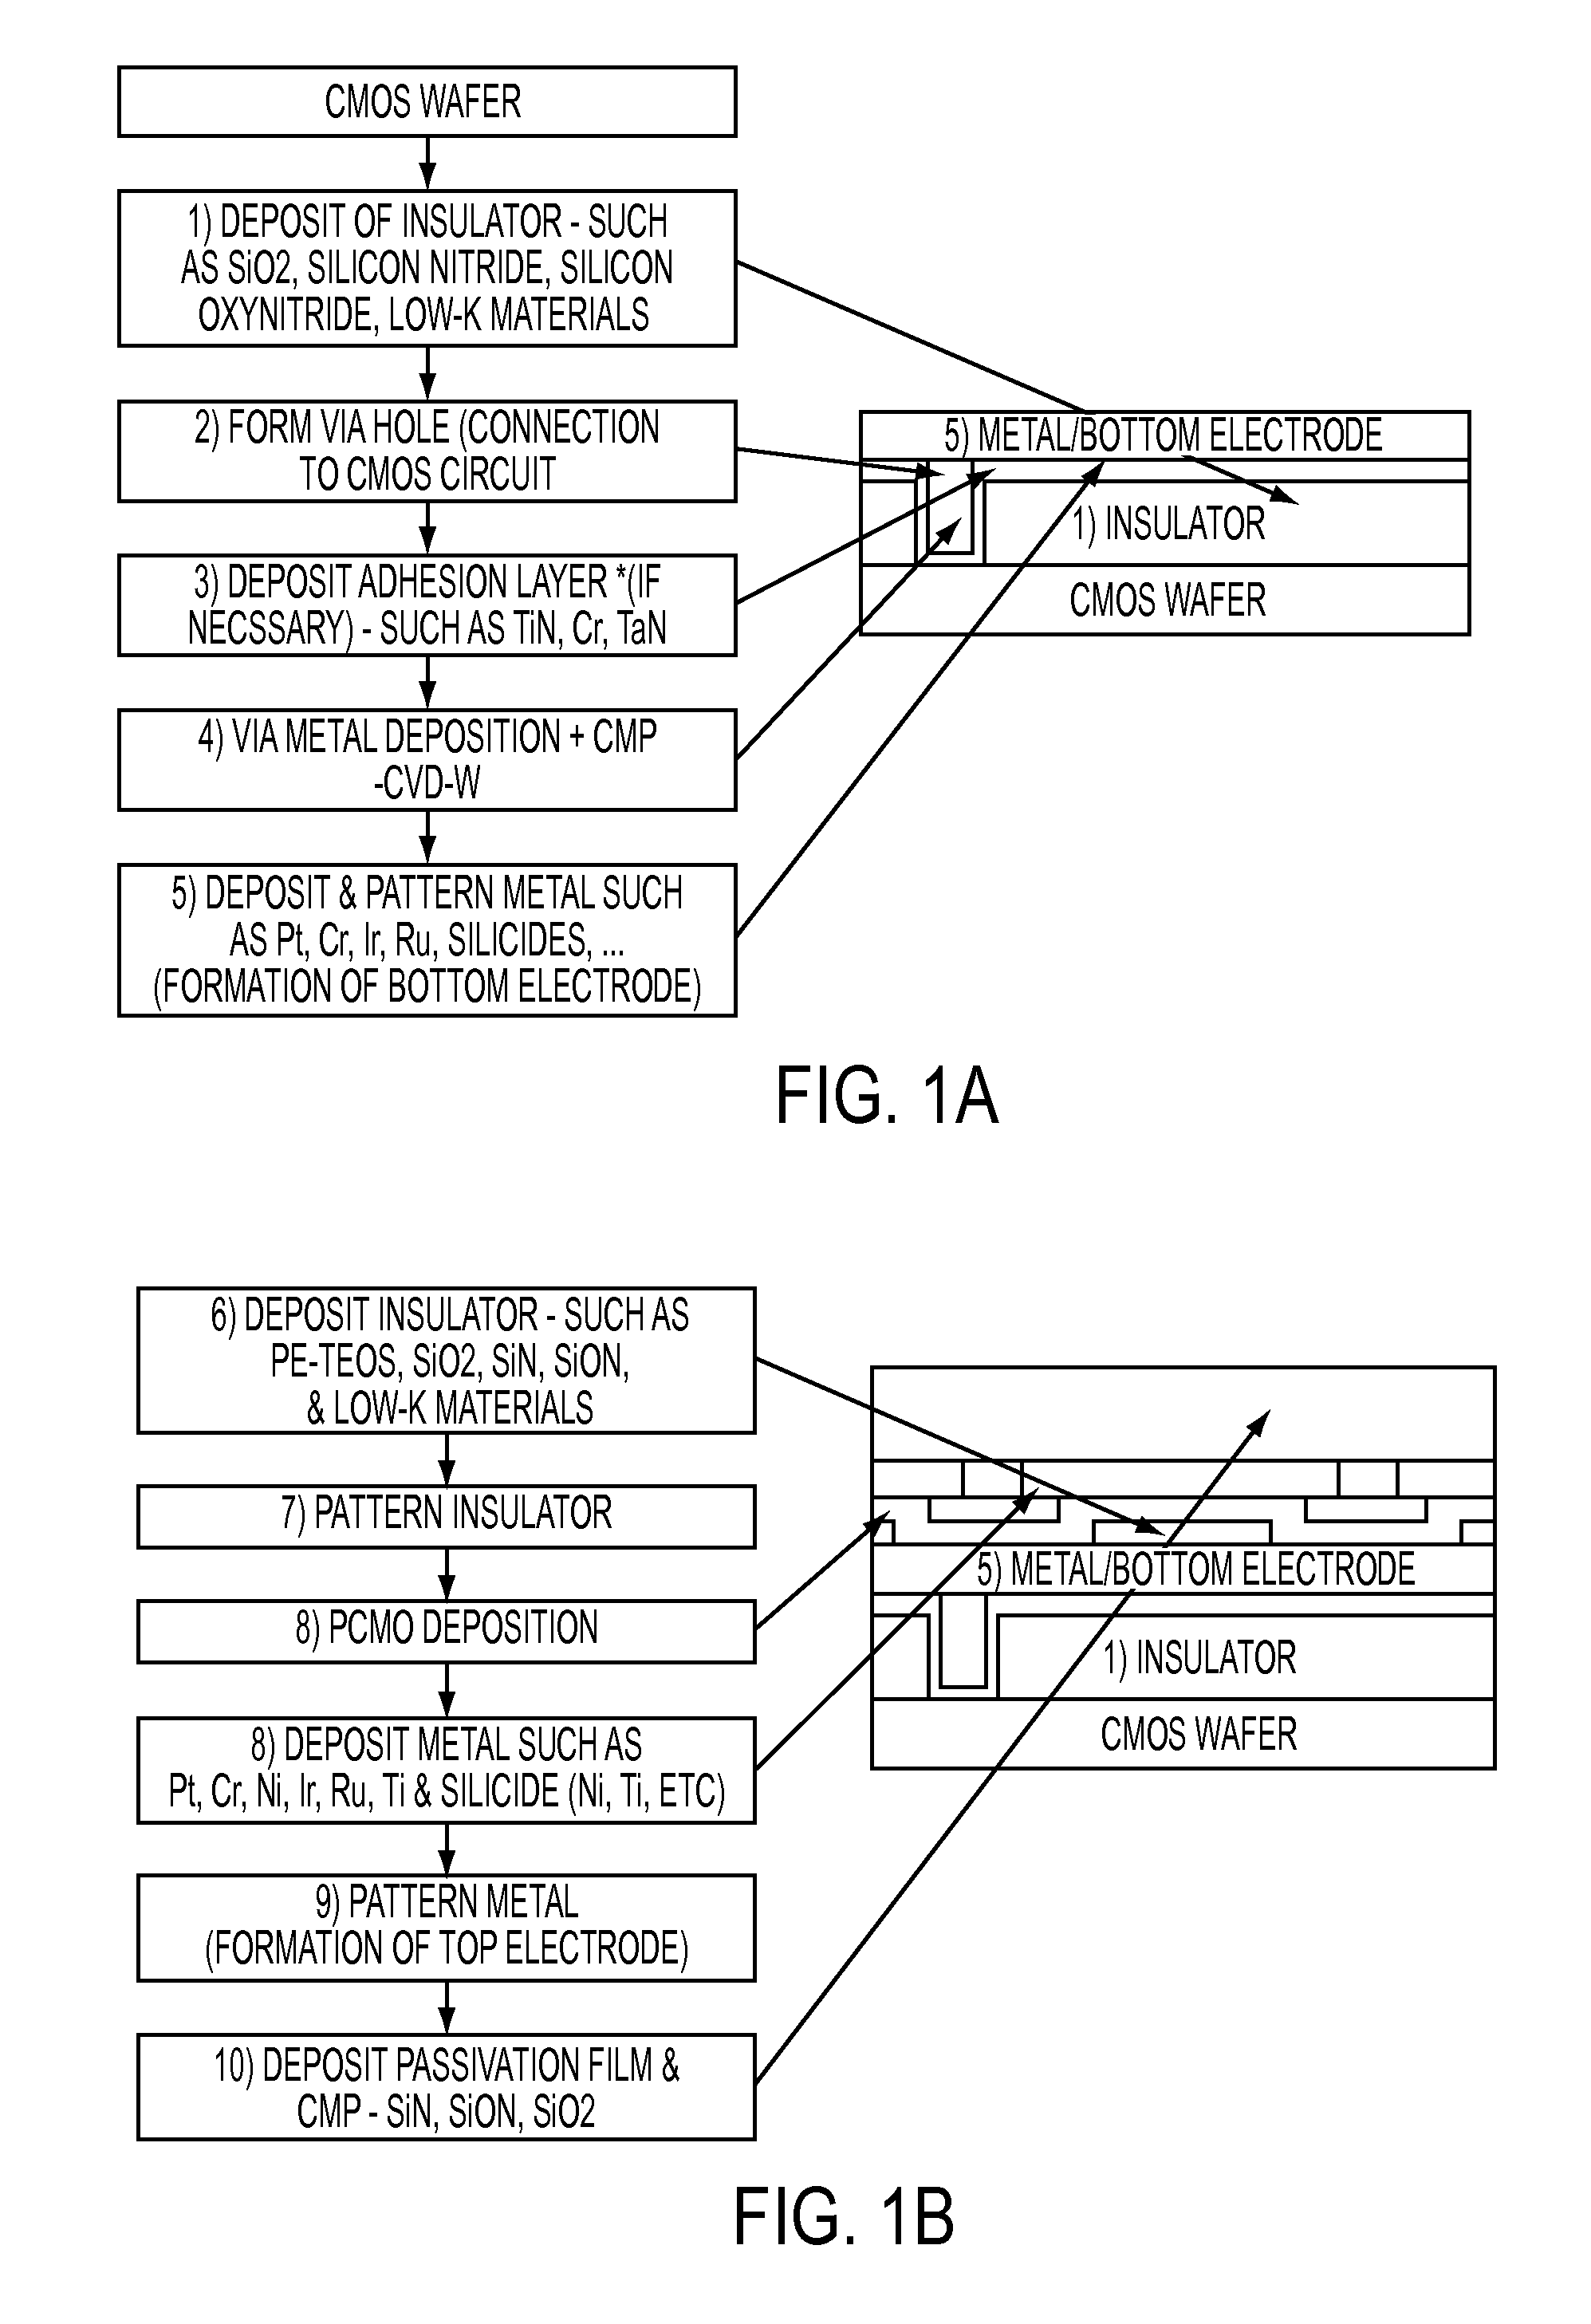 Systems and methods for fabricating self-aligned memory cell